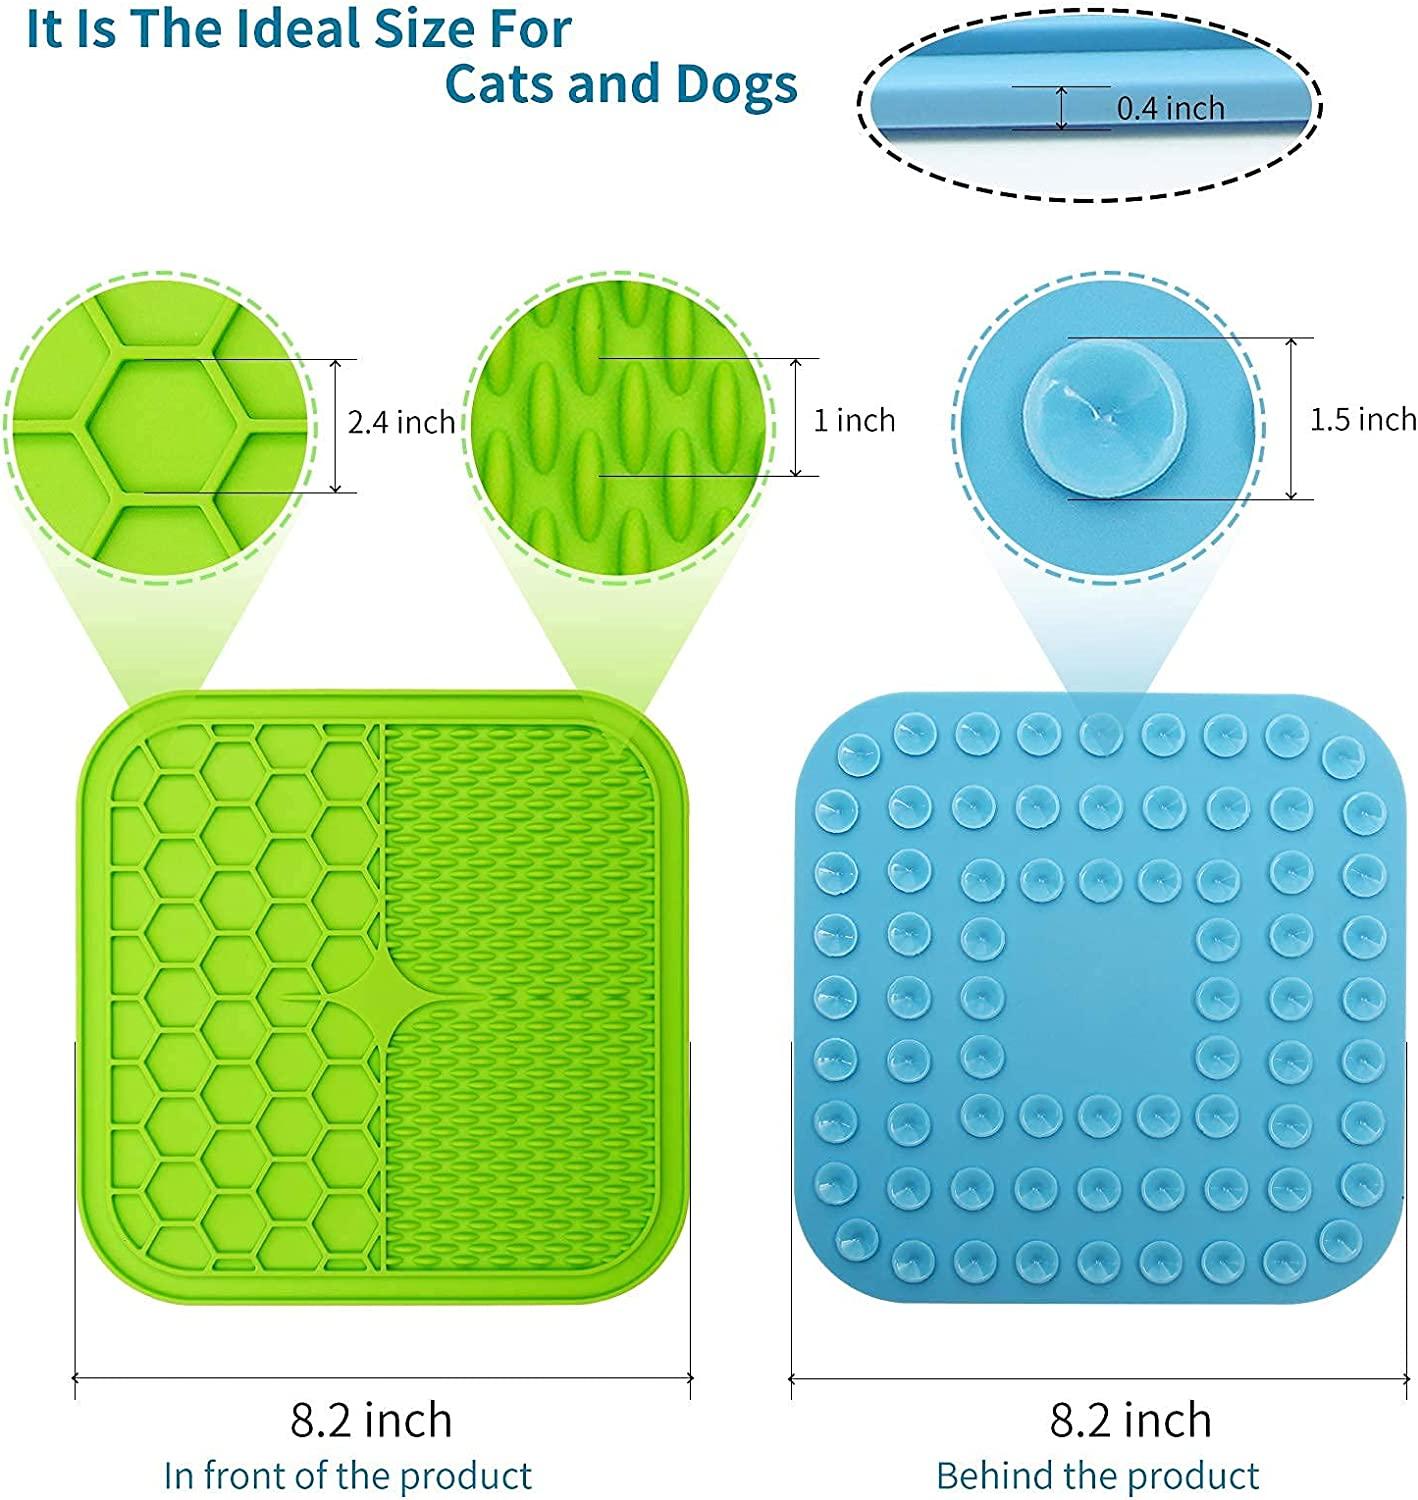 Dog Lick Mat Silicone Lick Pad for Fun, Anxiety & Boredom Relief